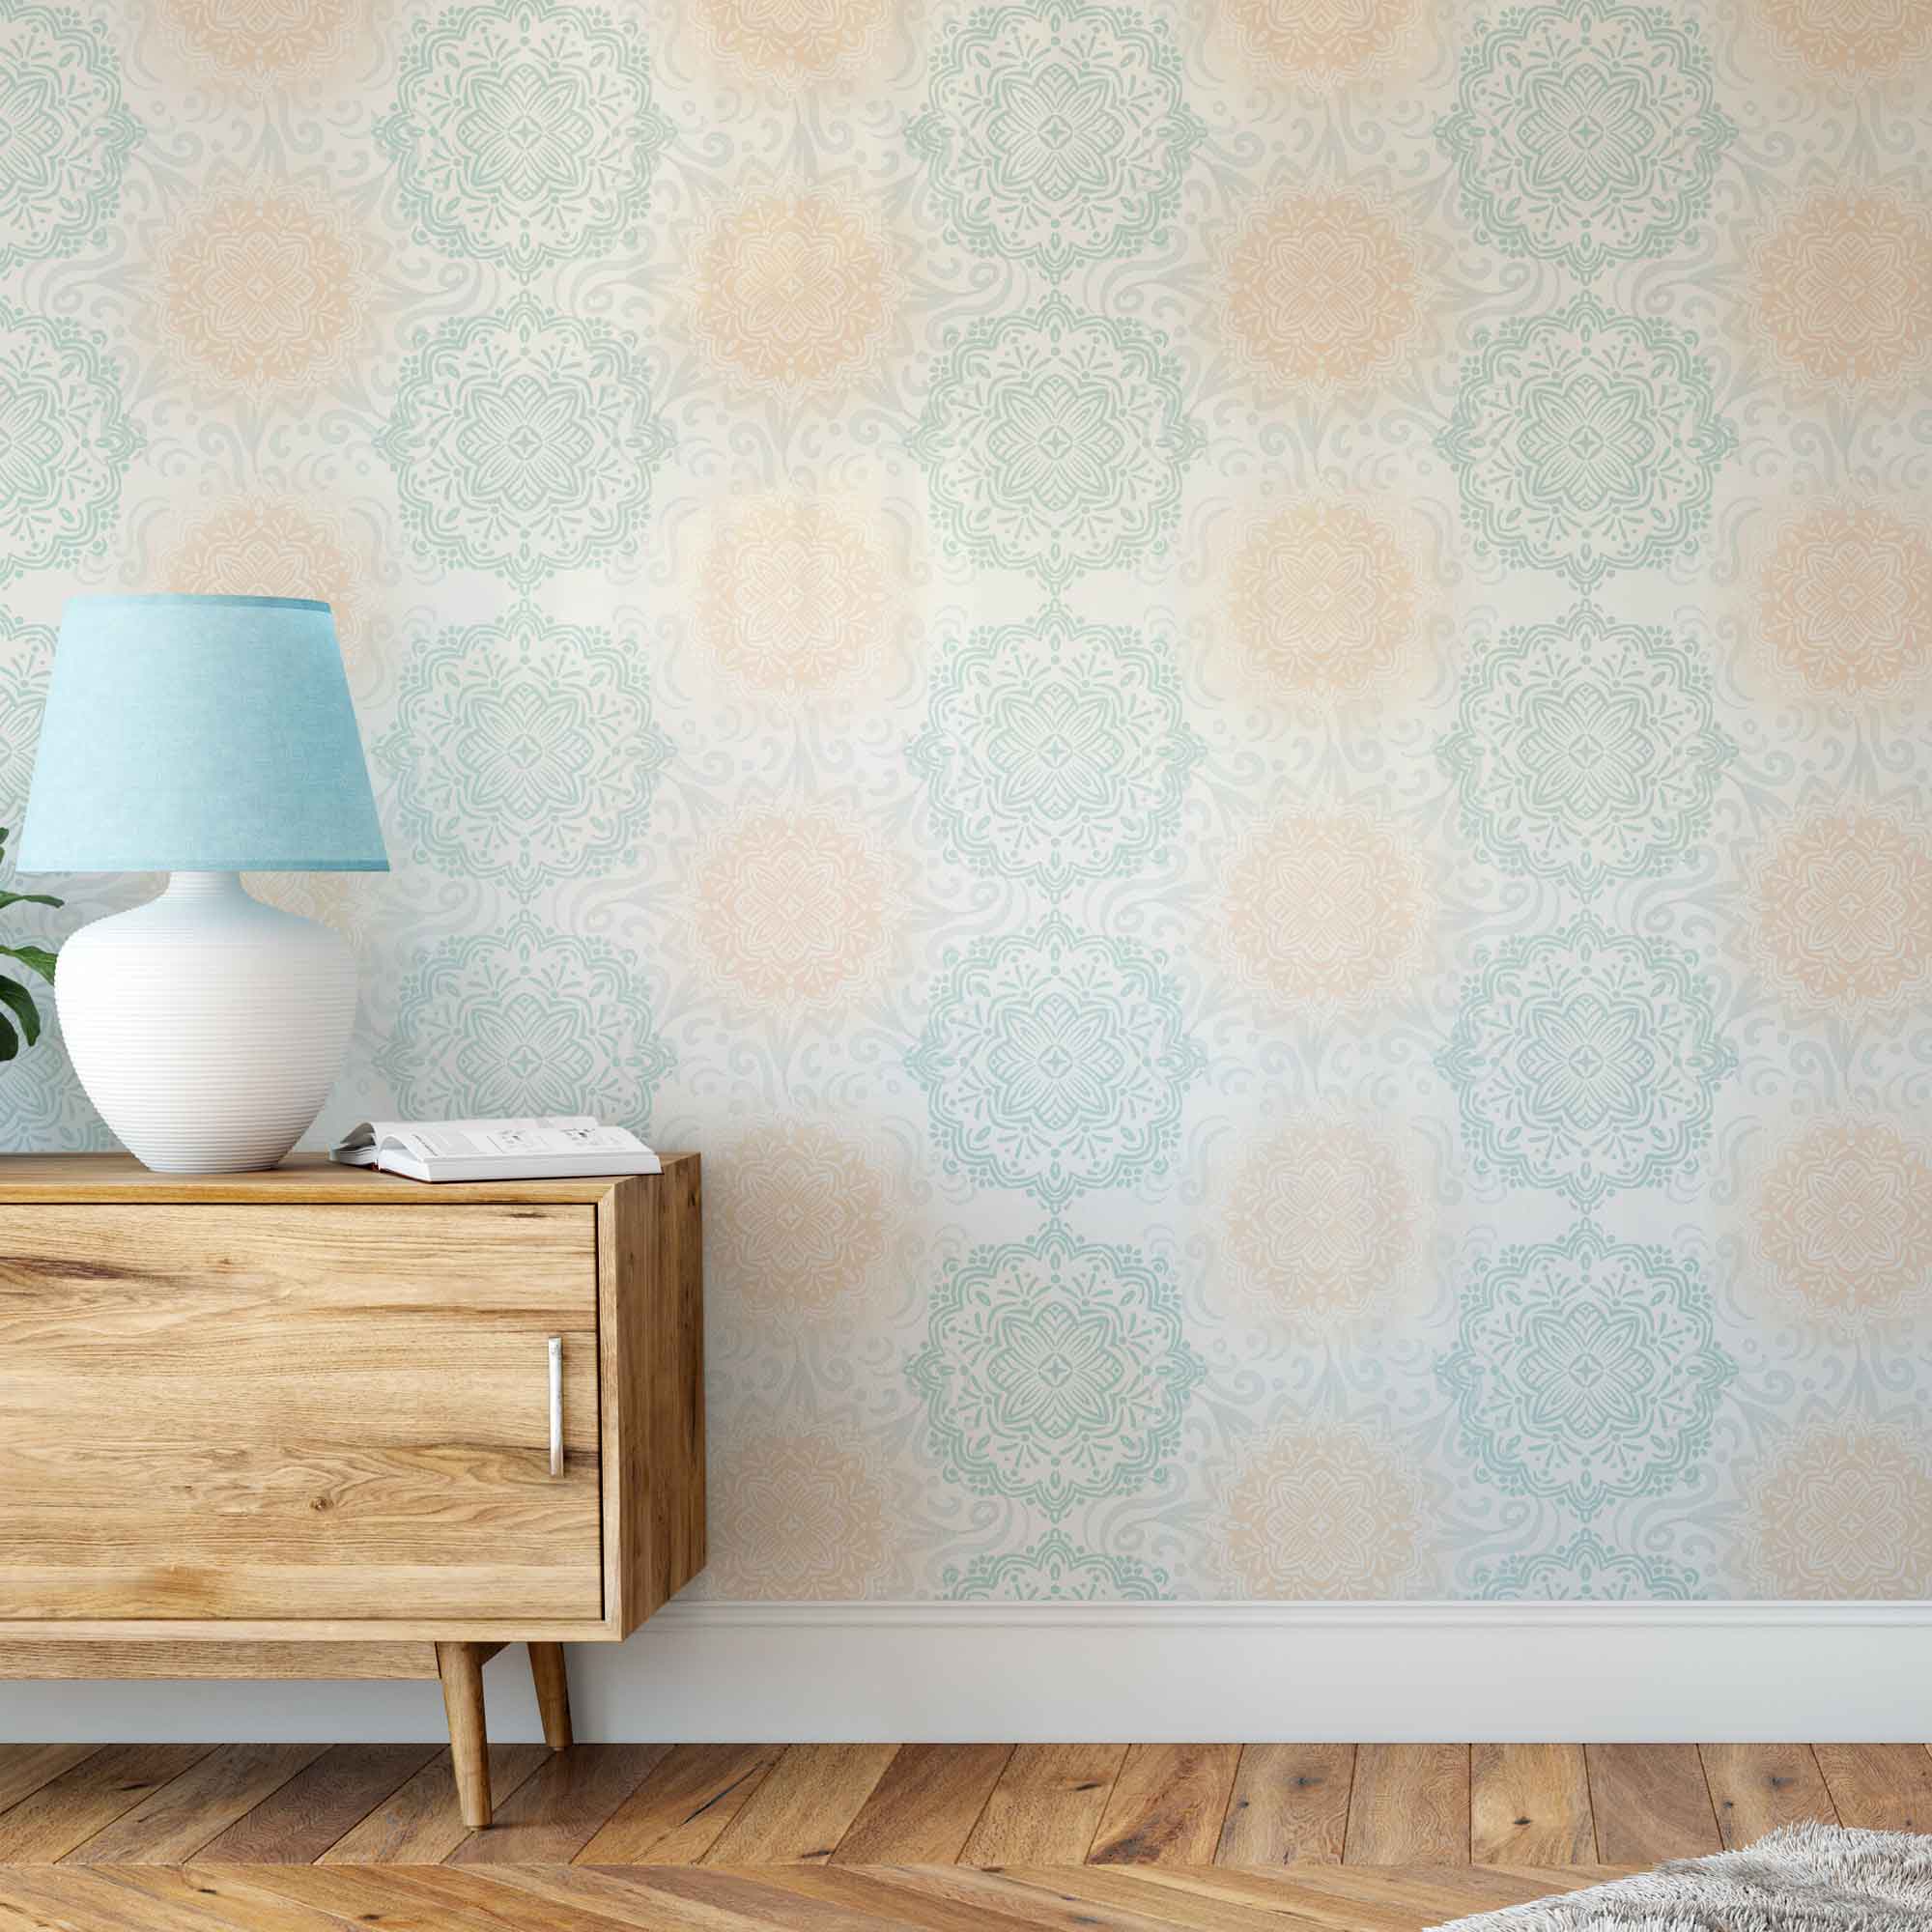 Boho Hand-drawn Mandalas in Pastel Aqua and Peach Removable Peel & Stick and Pre-Pasted Wallpaper Living Room example